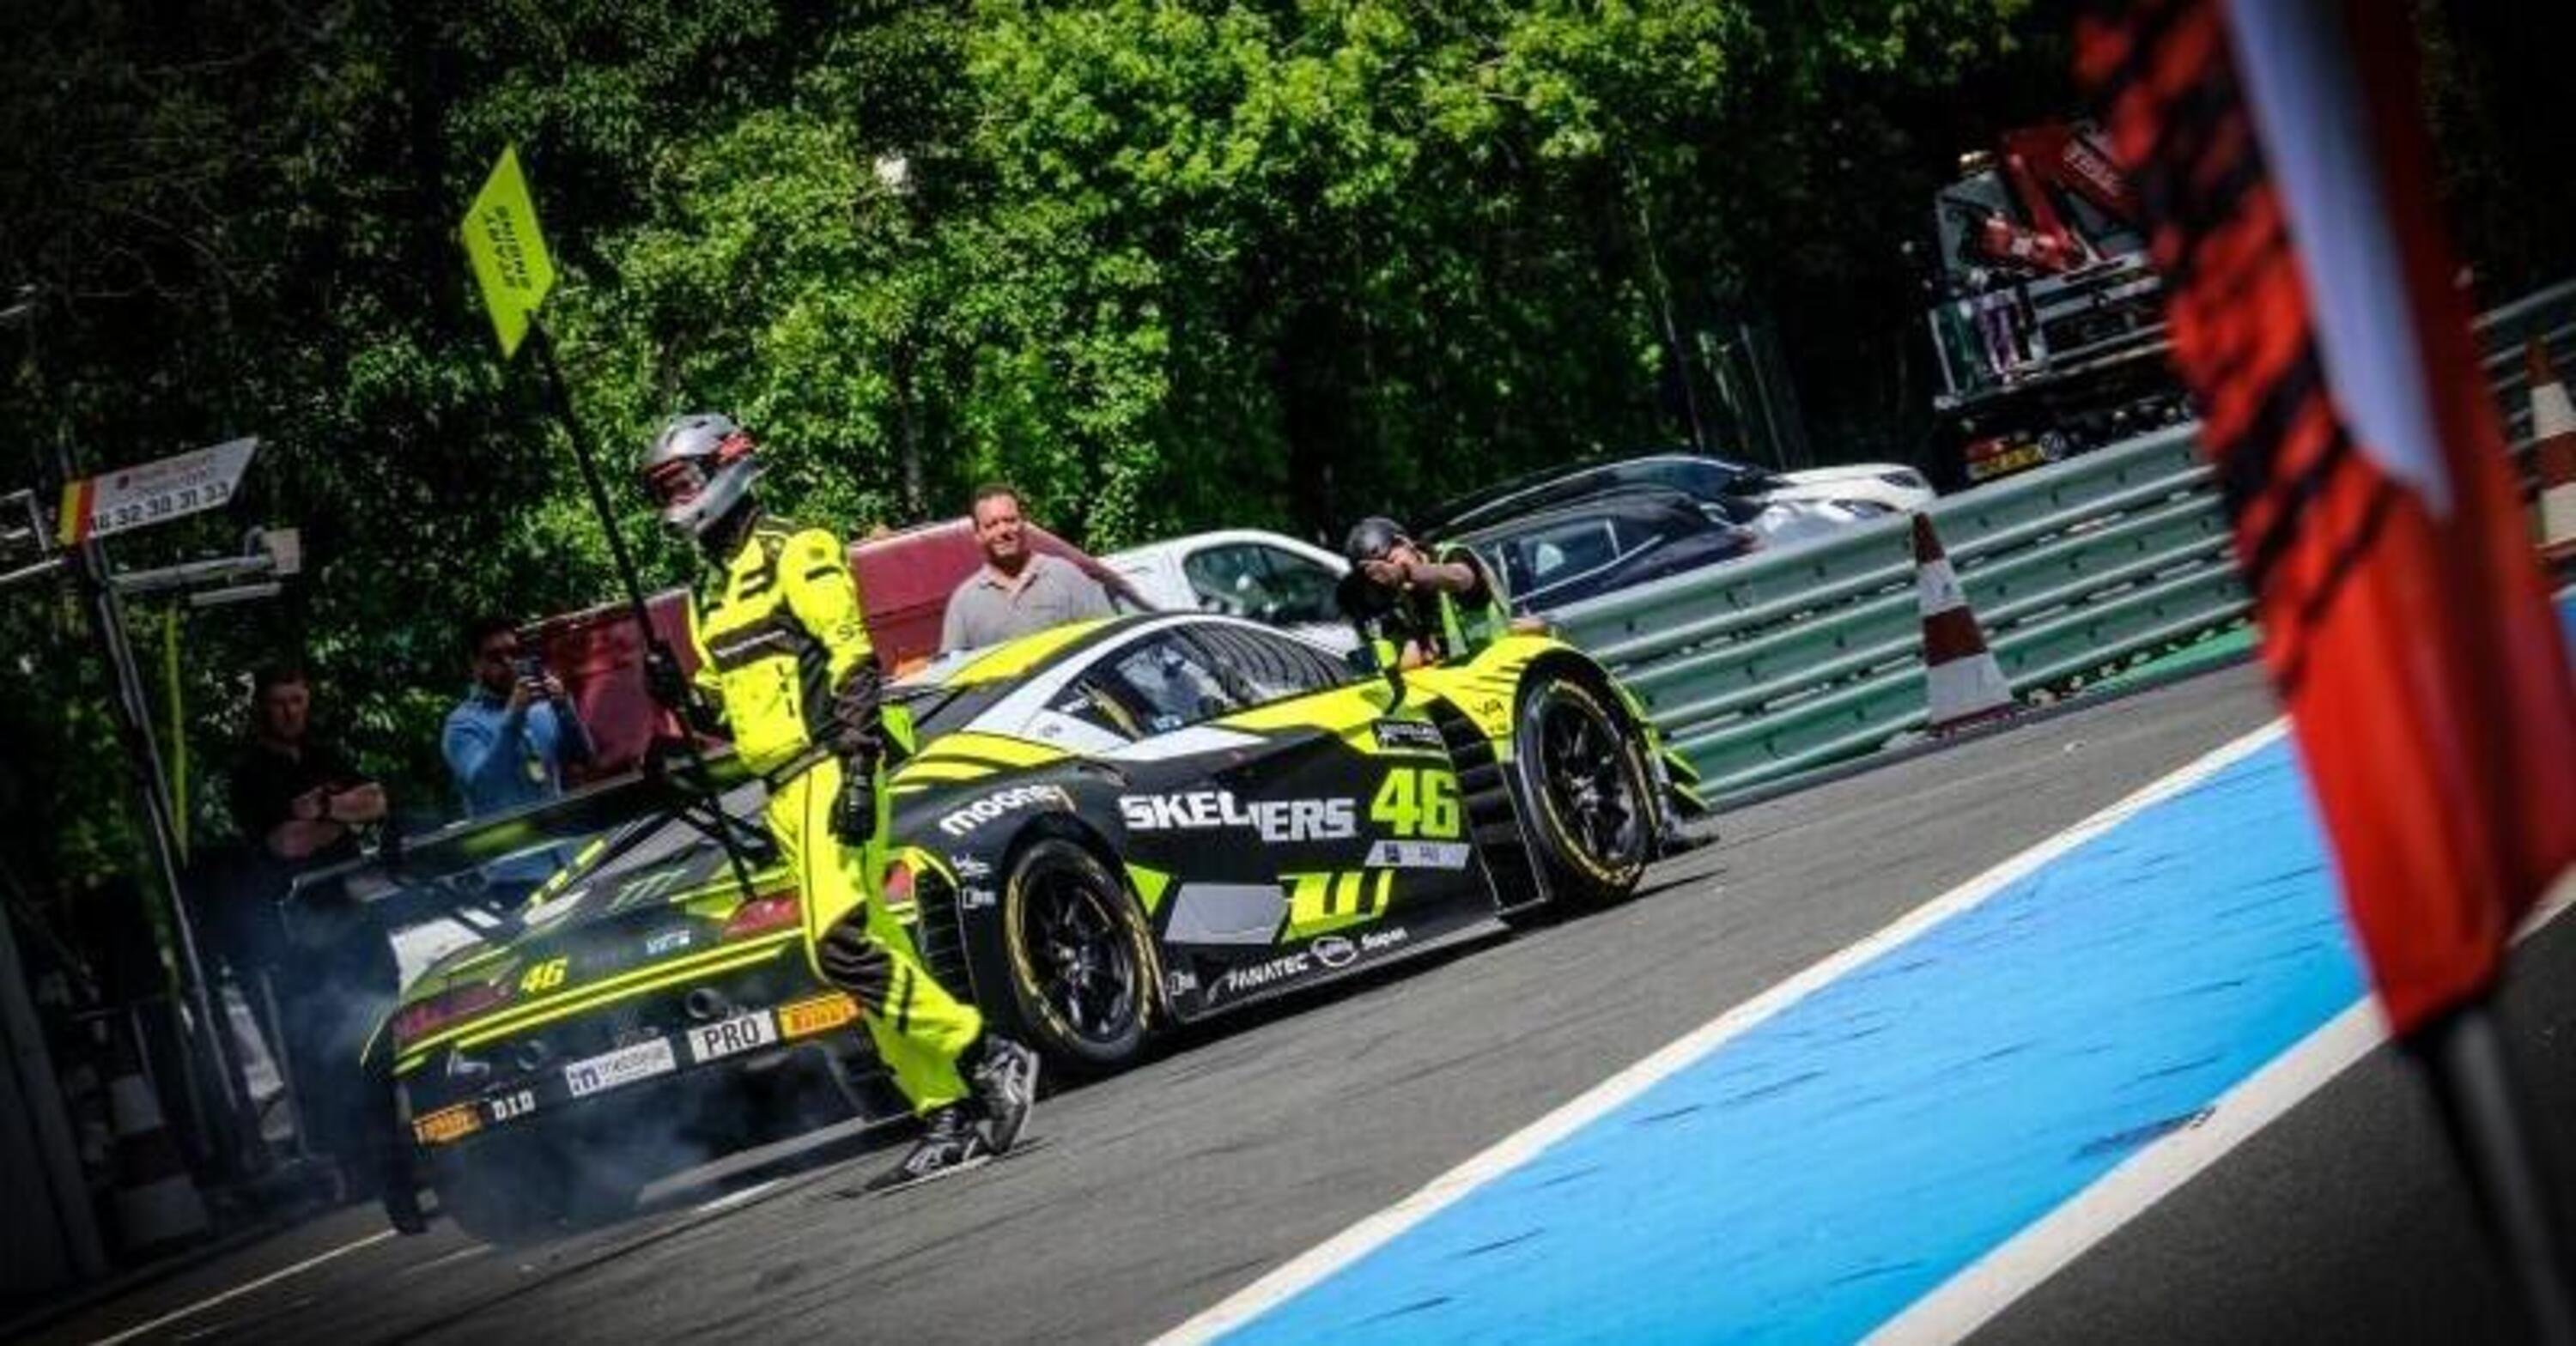 GTWCE, Magny-Cours, gara 2: vince Mercedes. Rossi undicesimo